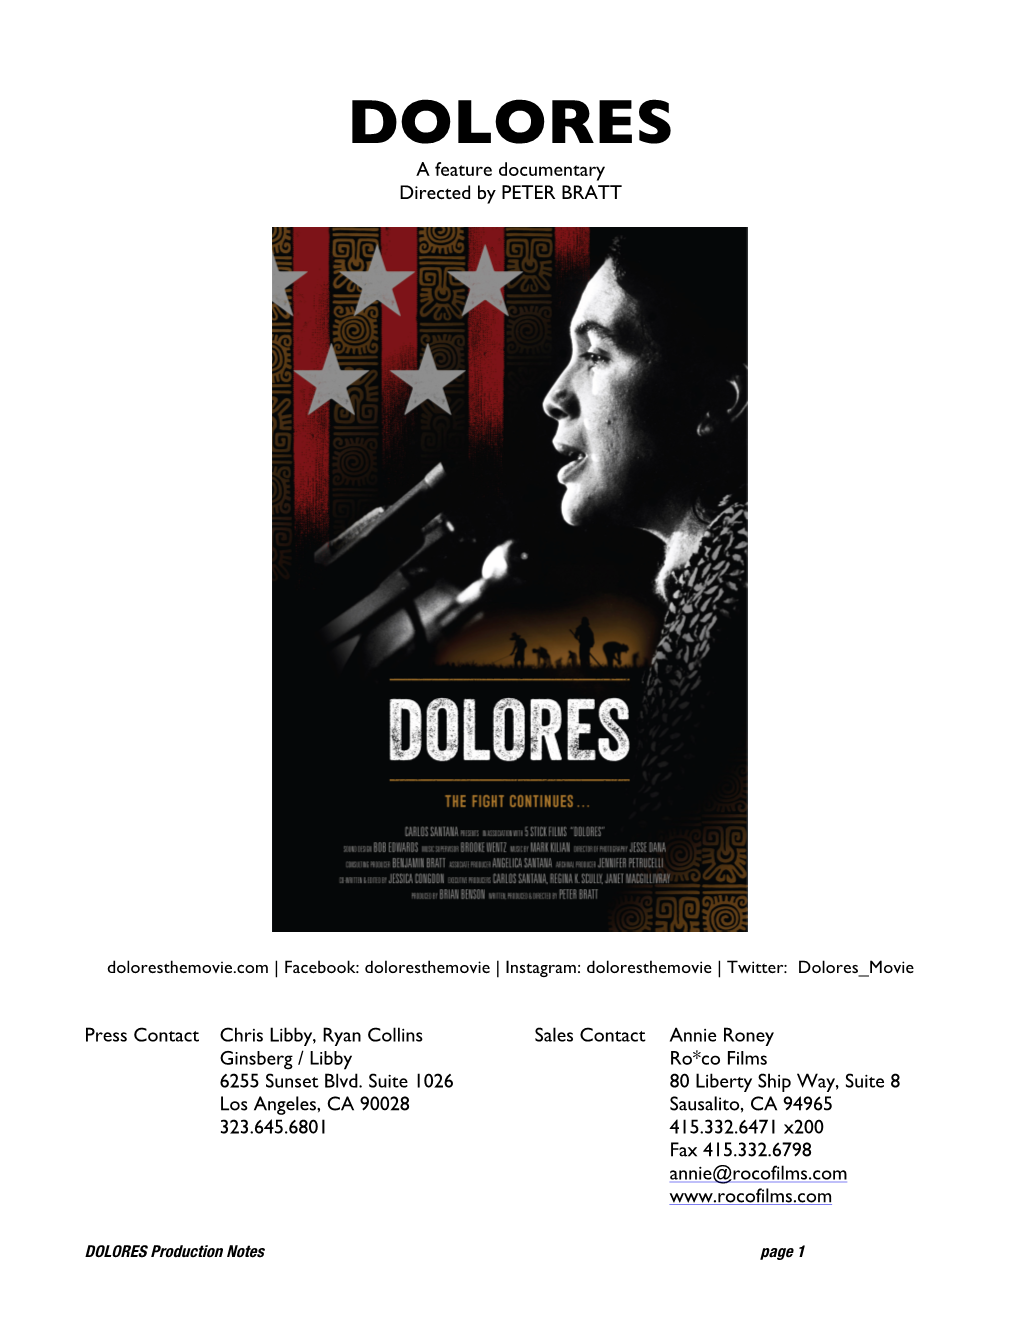 DOLORES Production Notes V3